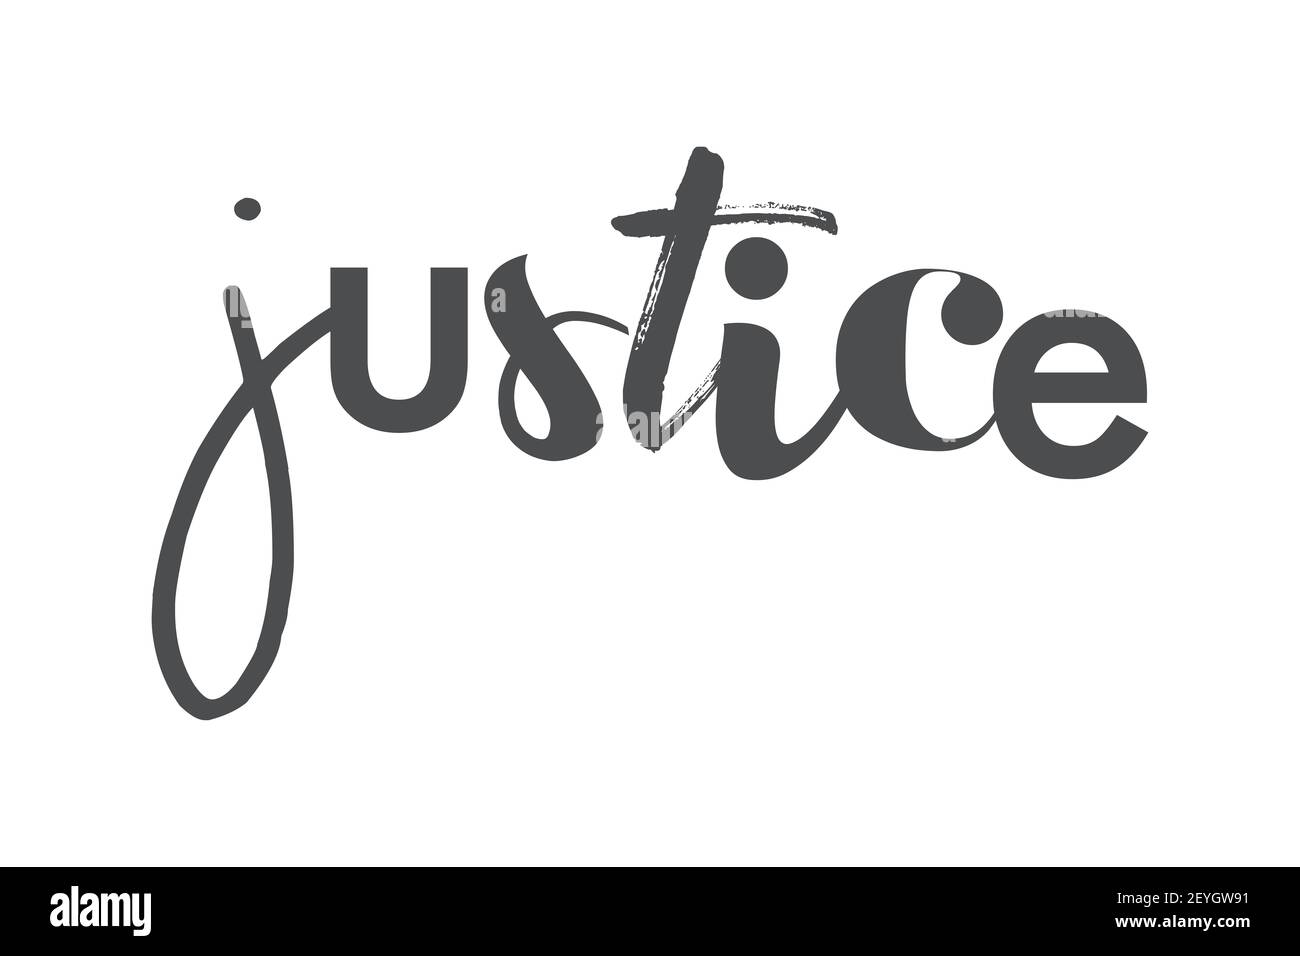 https://c8.alamy.com/comp/2EYGW91/modern-playful-bold-graphic-design-of-a-saying-justice-in-grey-color-creative-experimental-cool-and-trendy-typography-2EYGW91.jpg